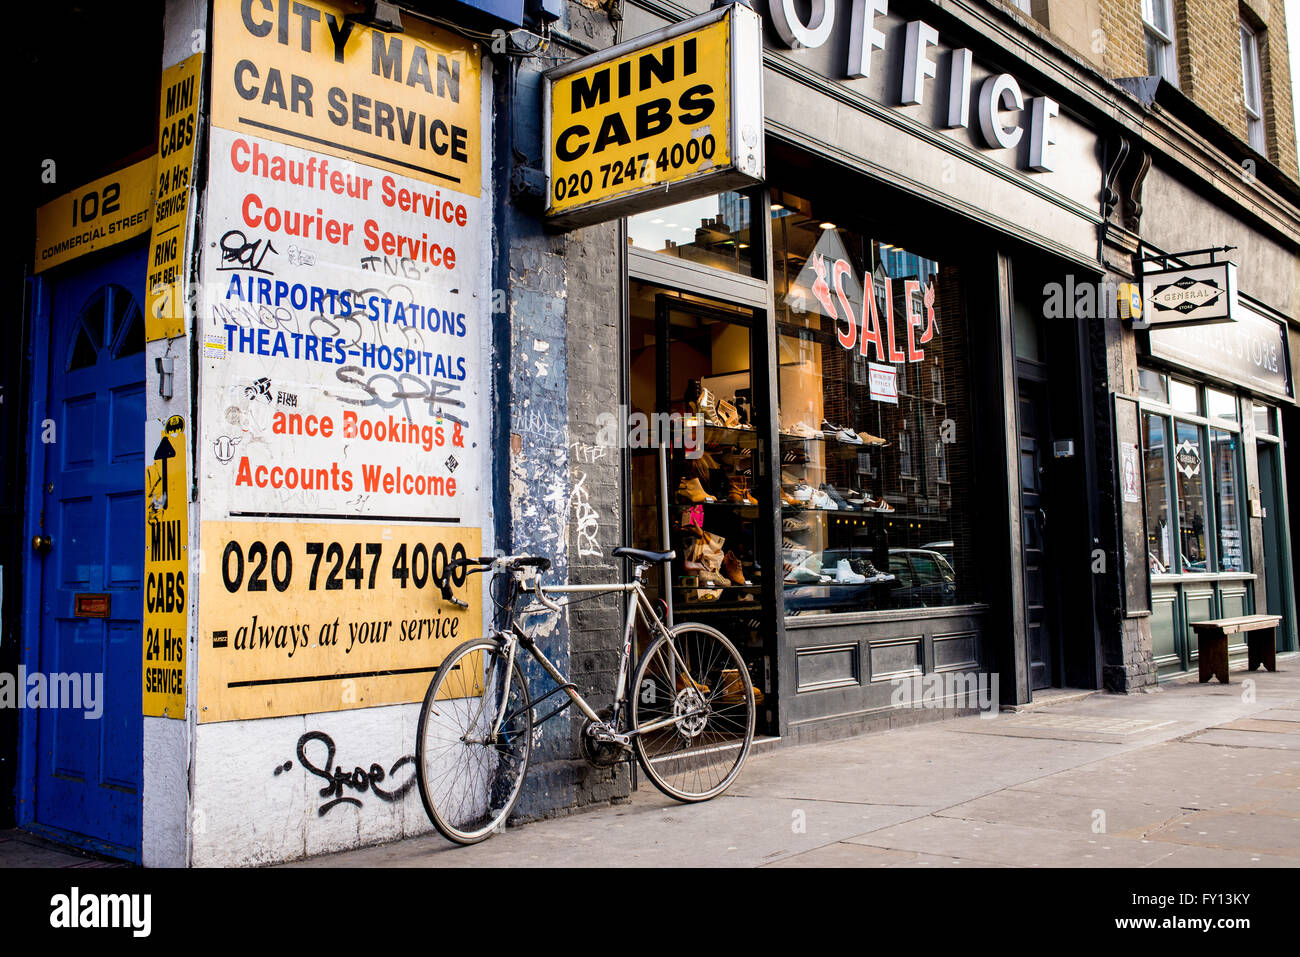 Mini cabs agency with old yellow billboards in a street in London. Bike parked in front. Stock Photo